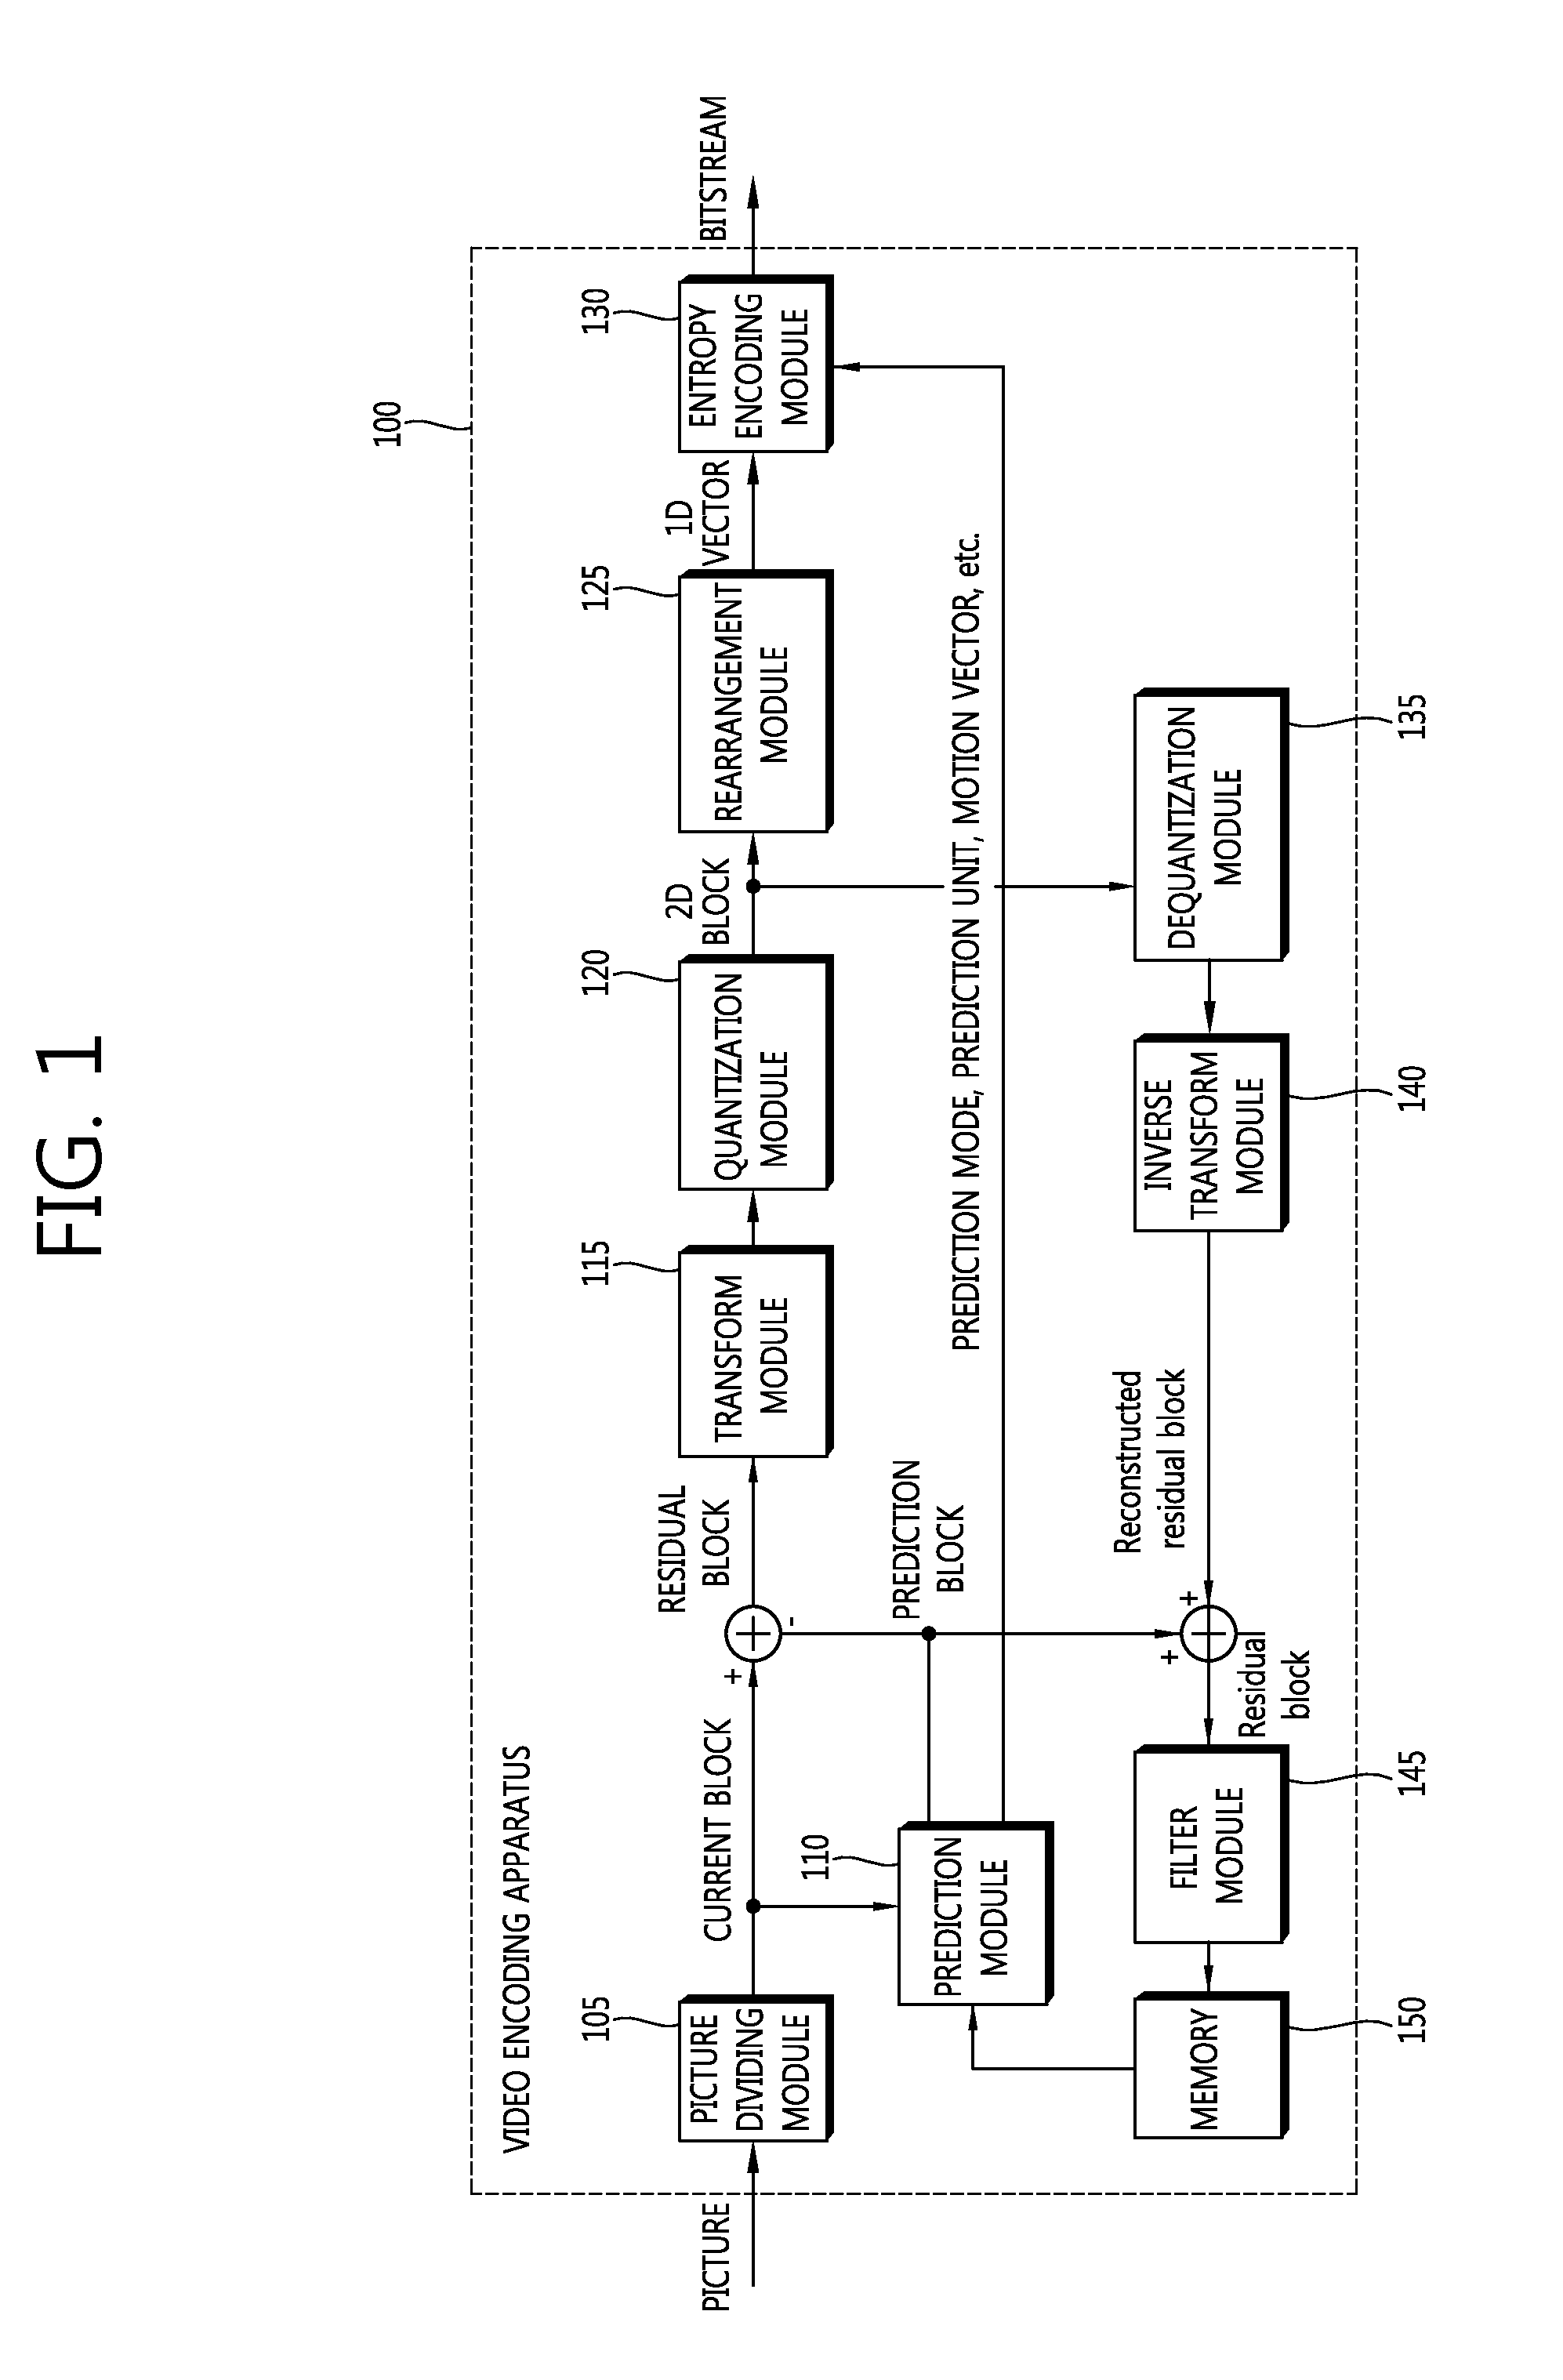 Method and apparatus for encoding/decoding image information